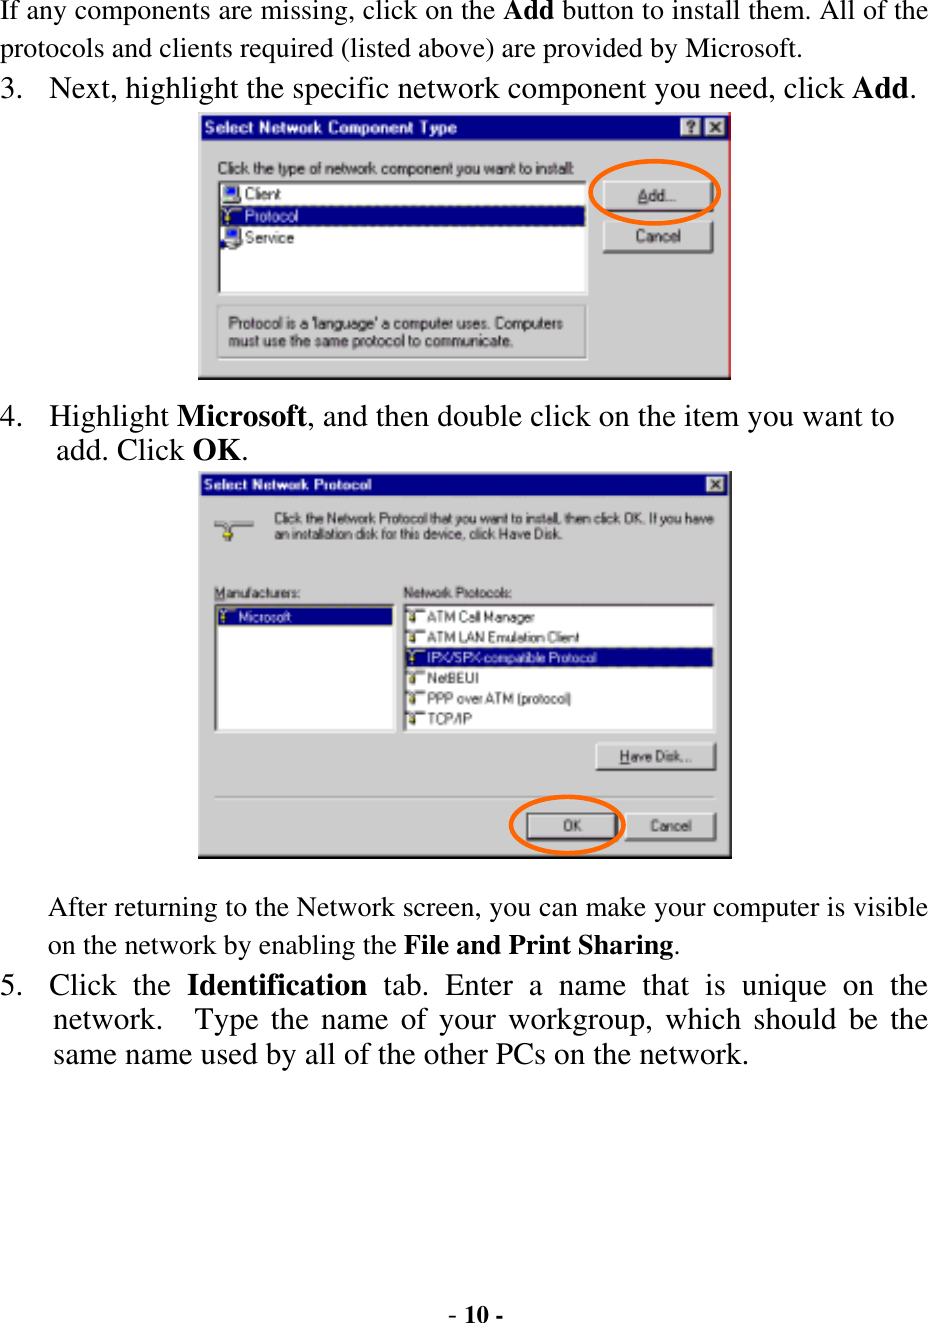  - 10 - If any components are missing, click on the Add button to install them. All of the protocols and clients required (listed above) are provided by Microsoft. 3.  Next, highlight the specific network component you need, click Add.  4. Highlight Microsoft, and then double click on the item you want to add. Click OK.  After returning to the Network screen, you can make your computer is visible on the network by enabling the File and Print Sharing. 5. Click the Identification tab. Enter a name that is unique on the network.  Type the name of your workgroup, which should be the same name used by all of the other PCs on the network. 